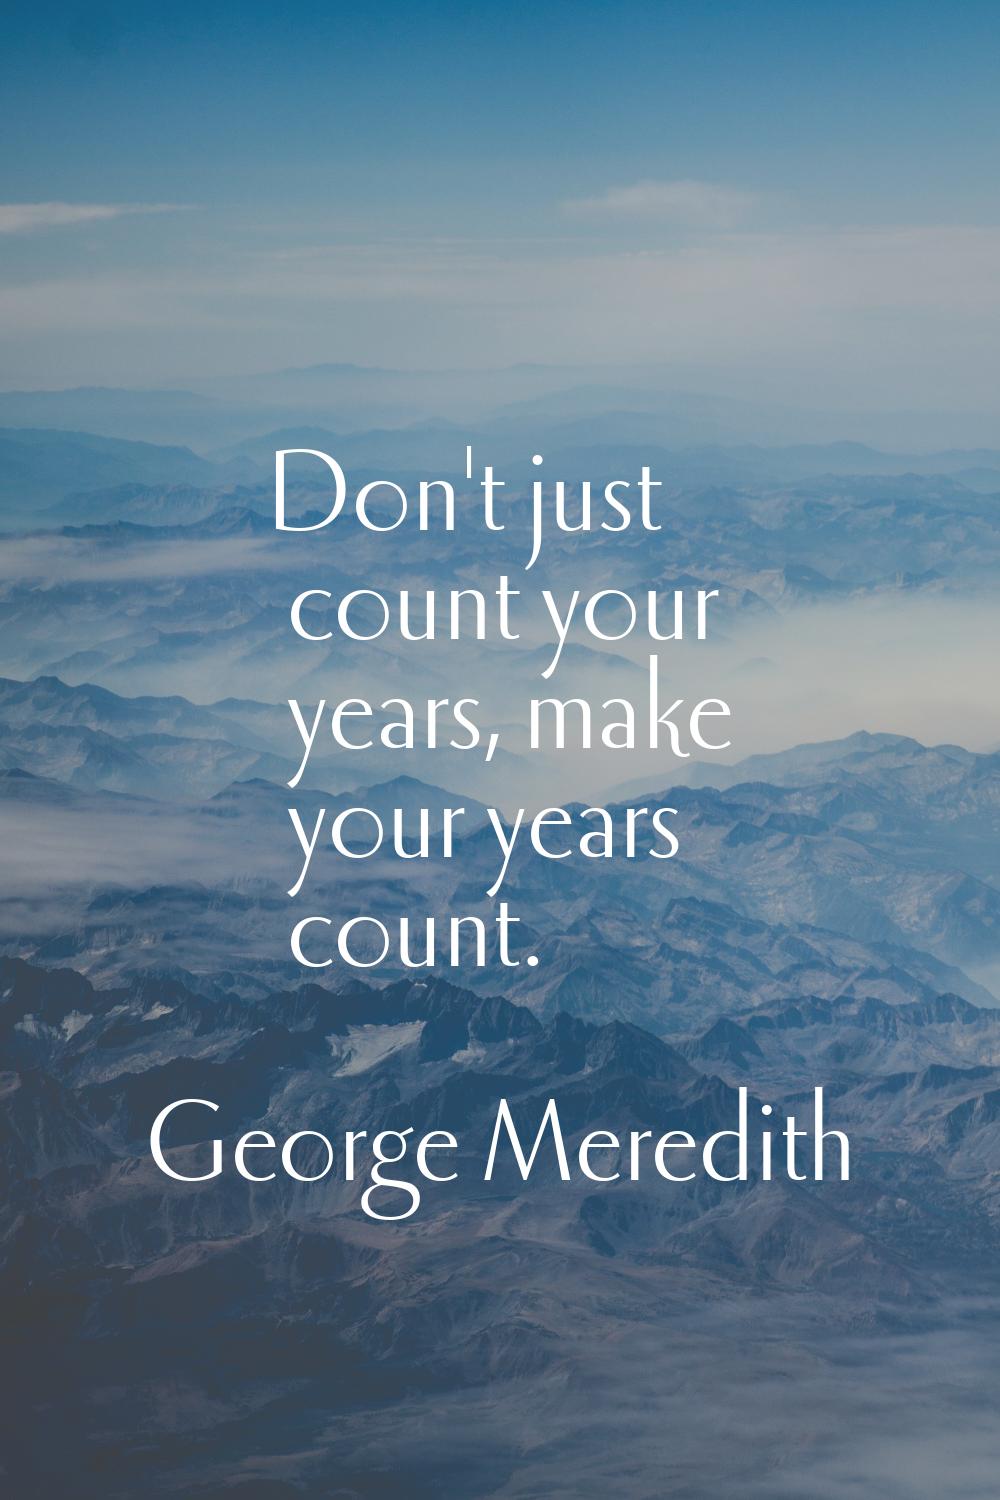 Don't just count your years, make your years count.